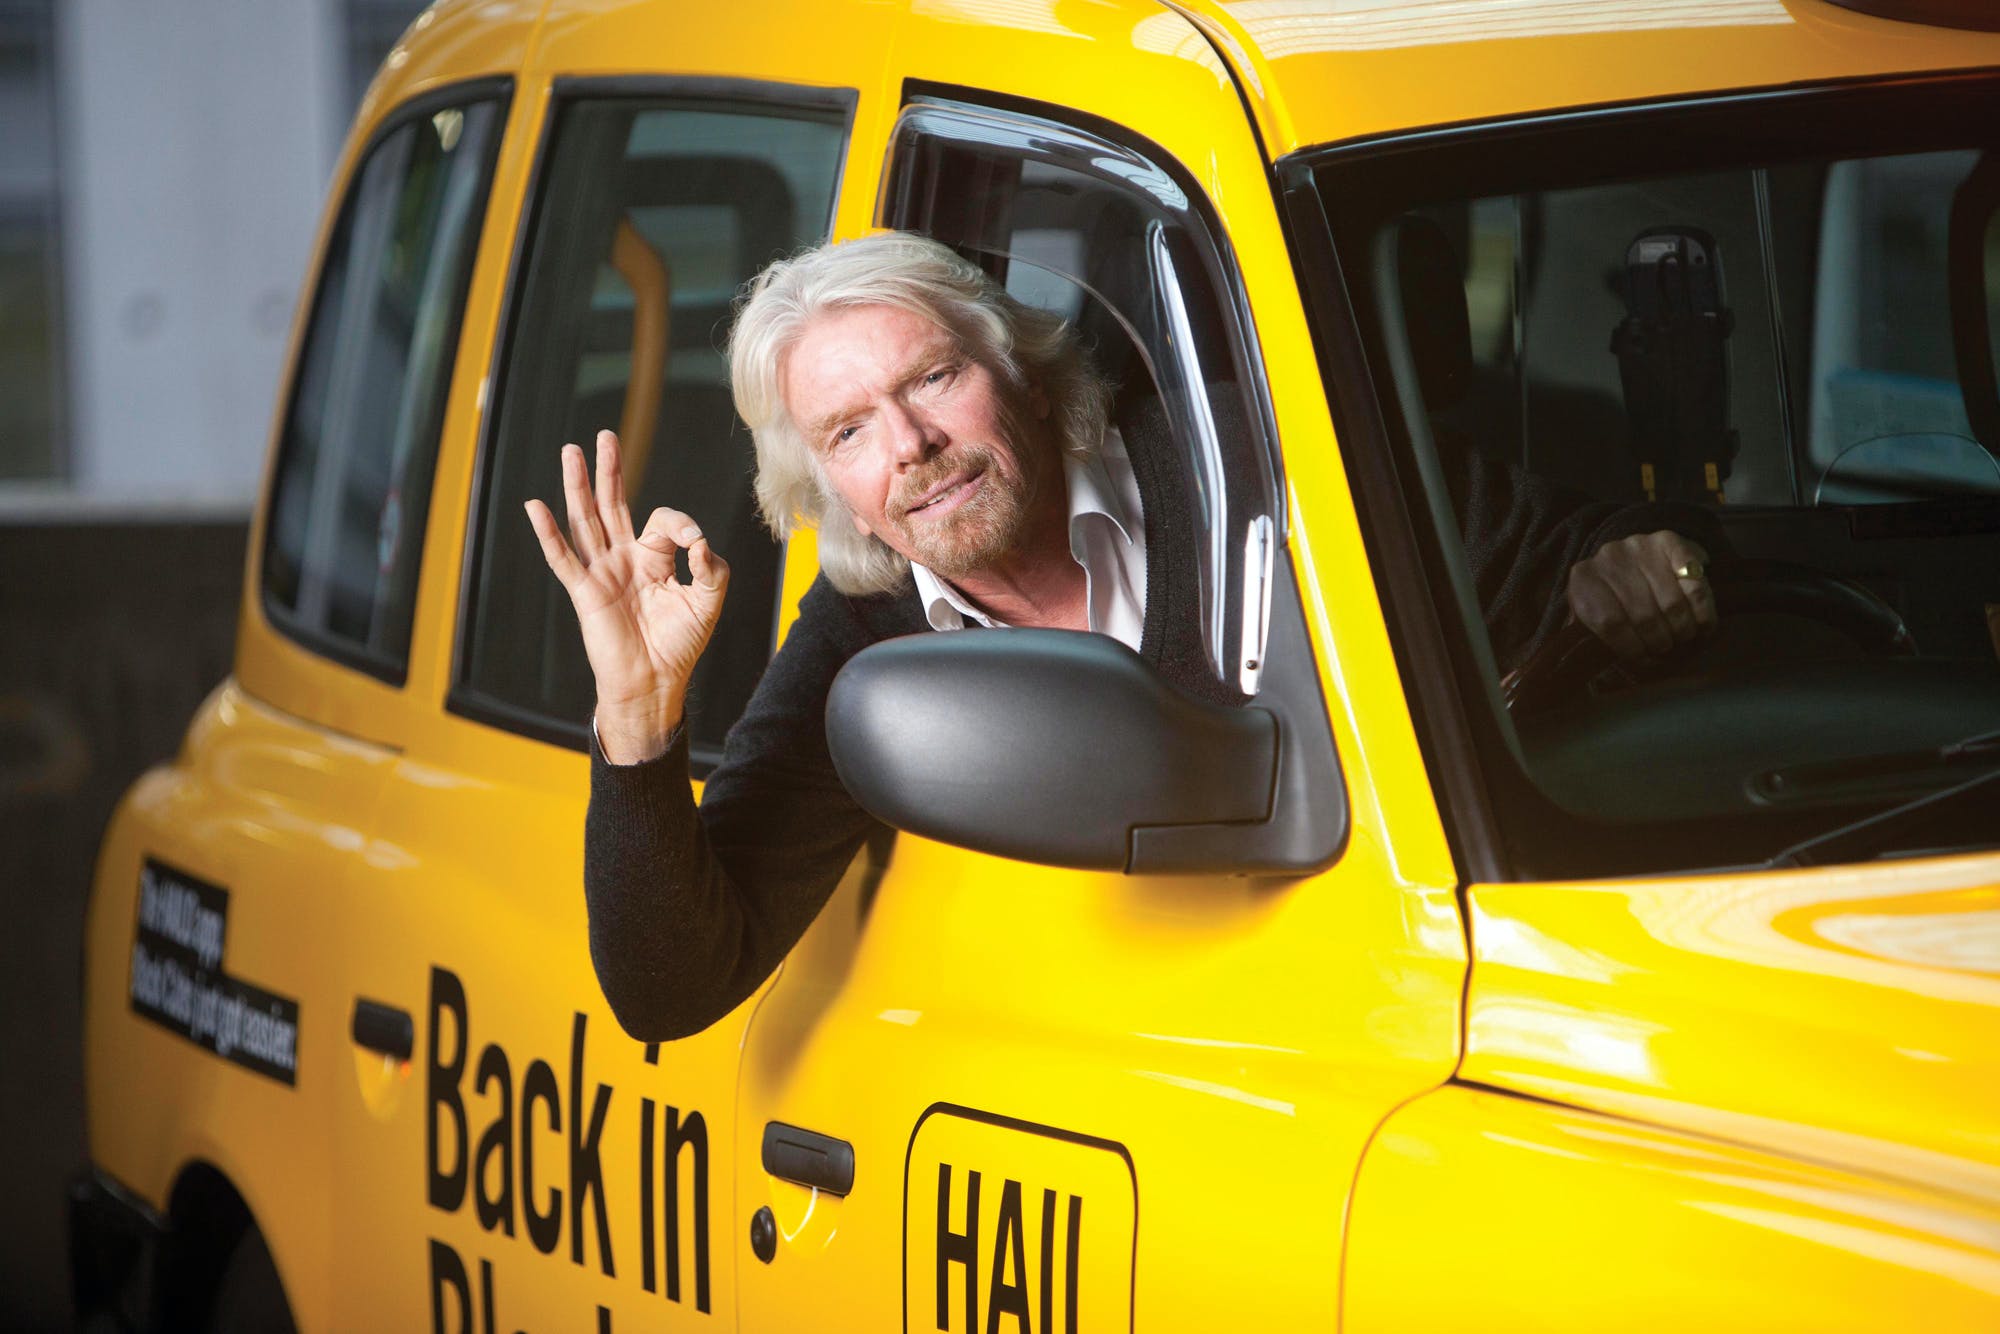 How to become a successful Taxi Driver in 3 simple steps